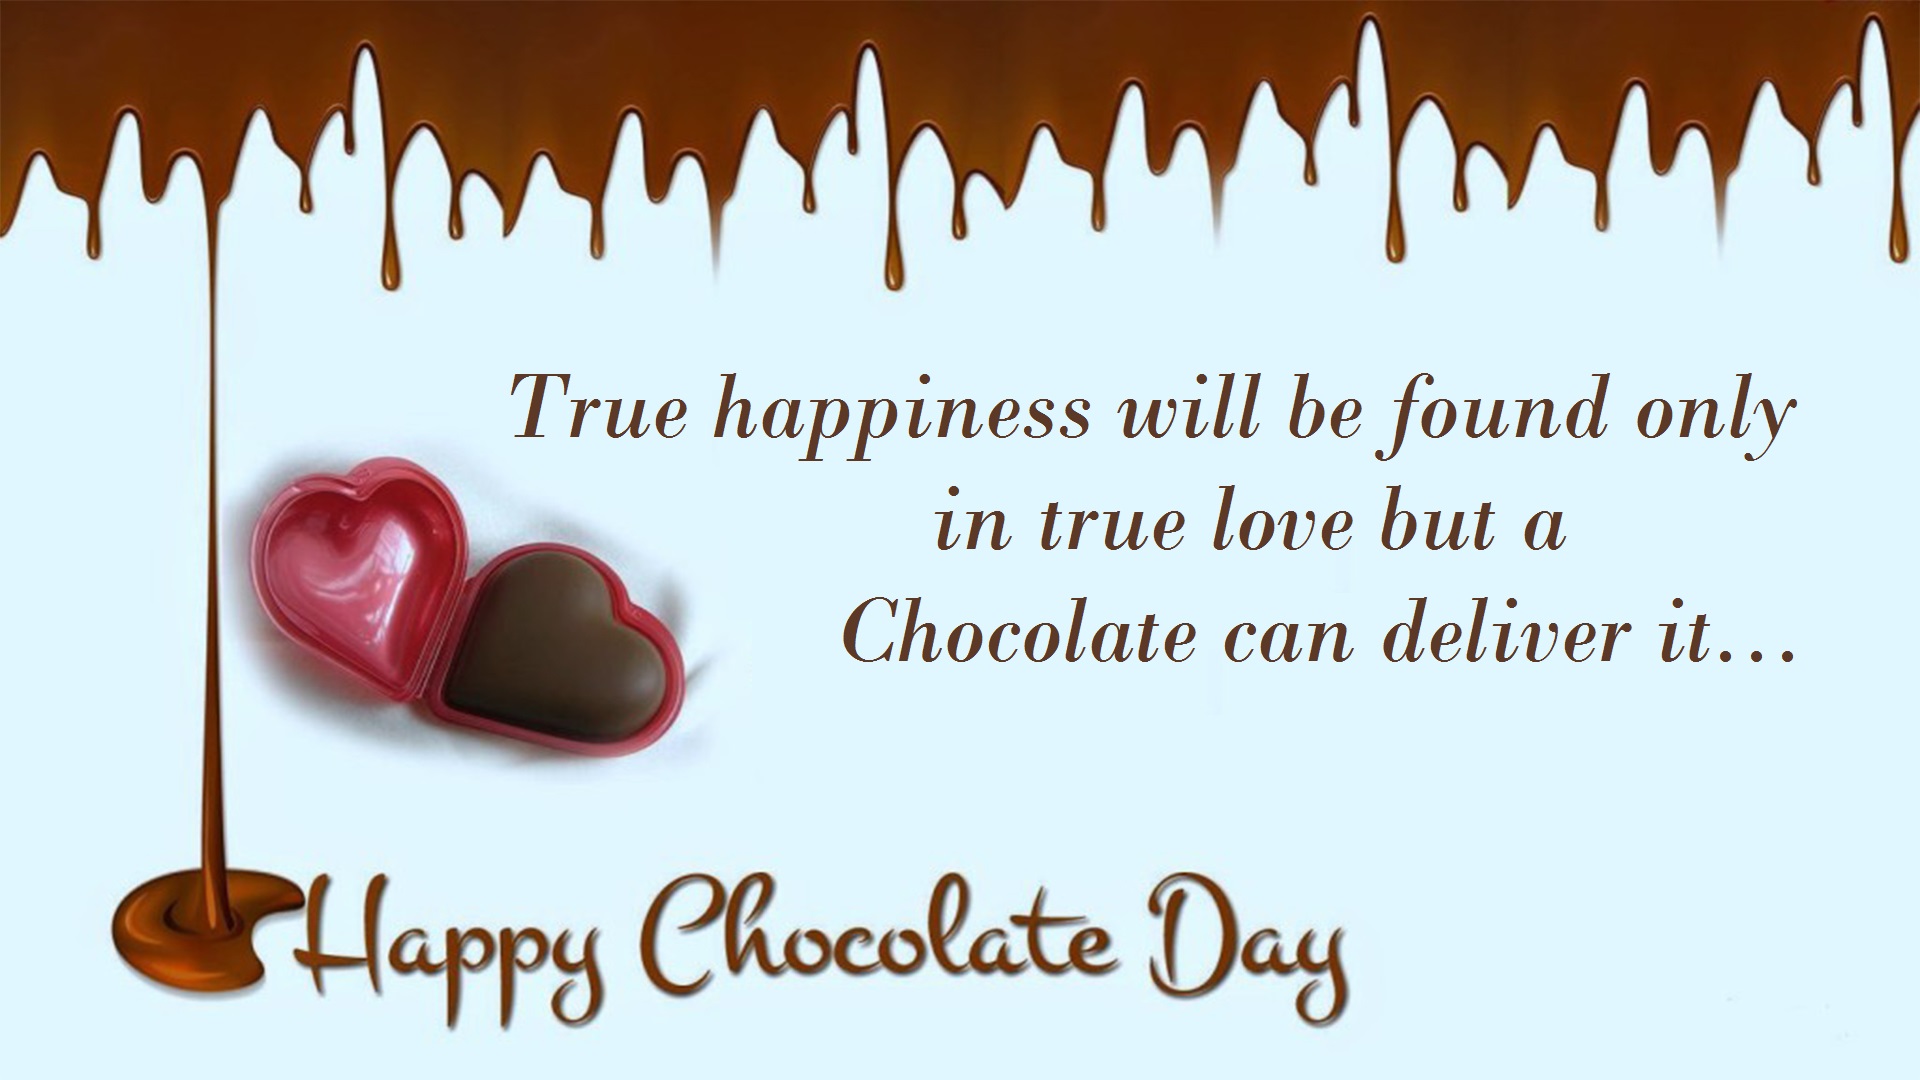 chocolate day quote image 2018